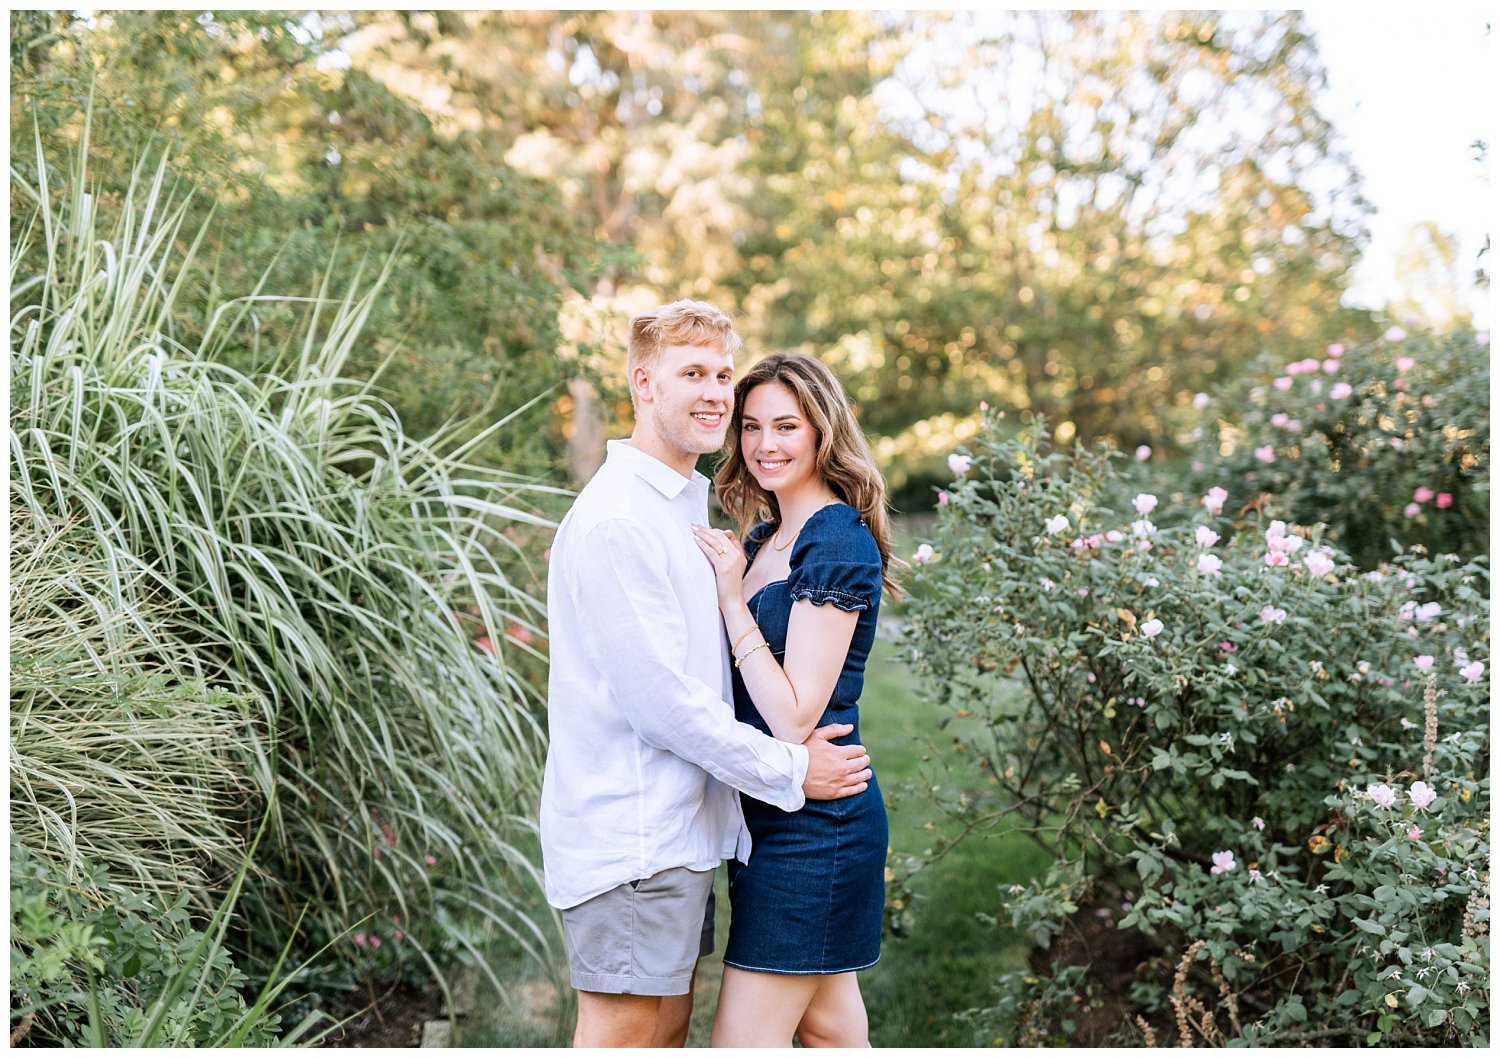 Engaged couple portraits at Oatlands Historic House in Leesburg, Virginia.